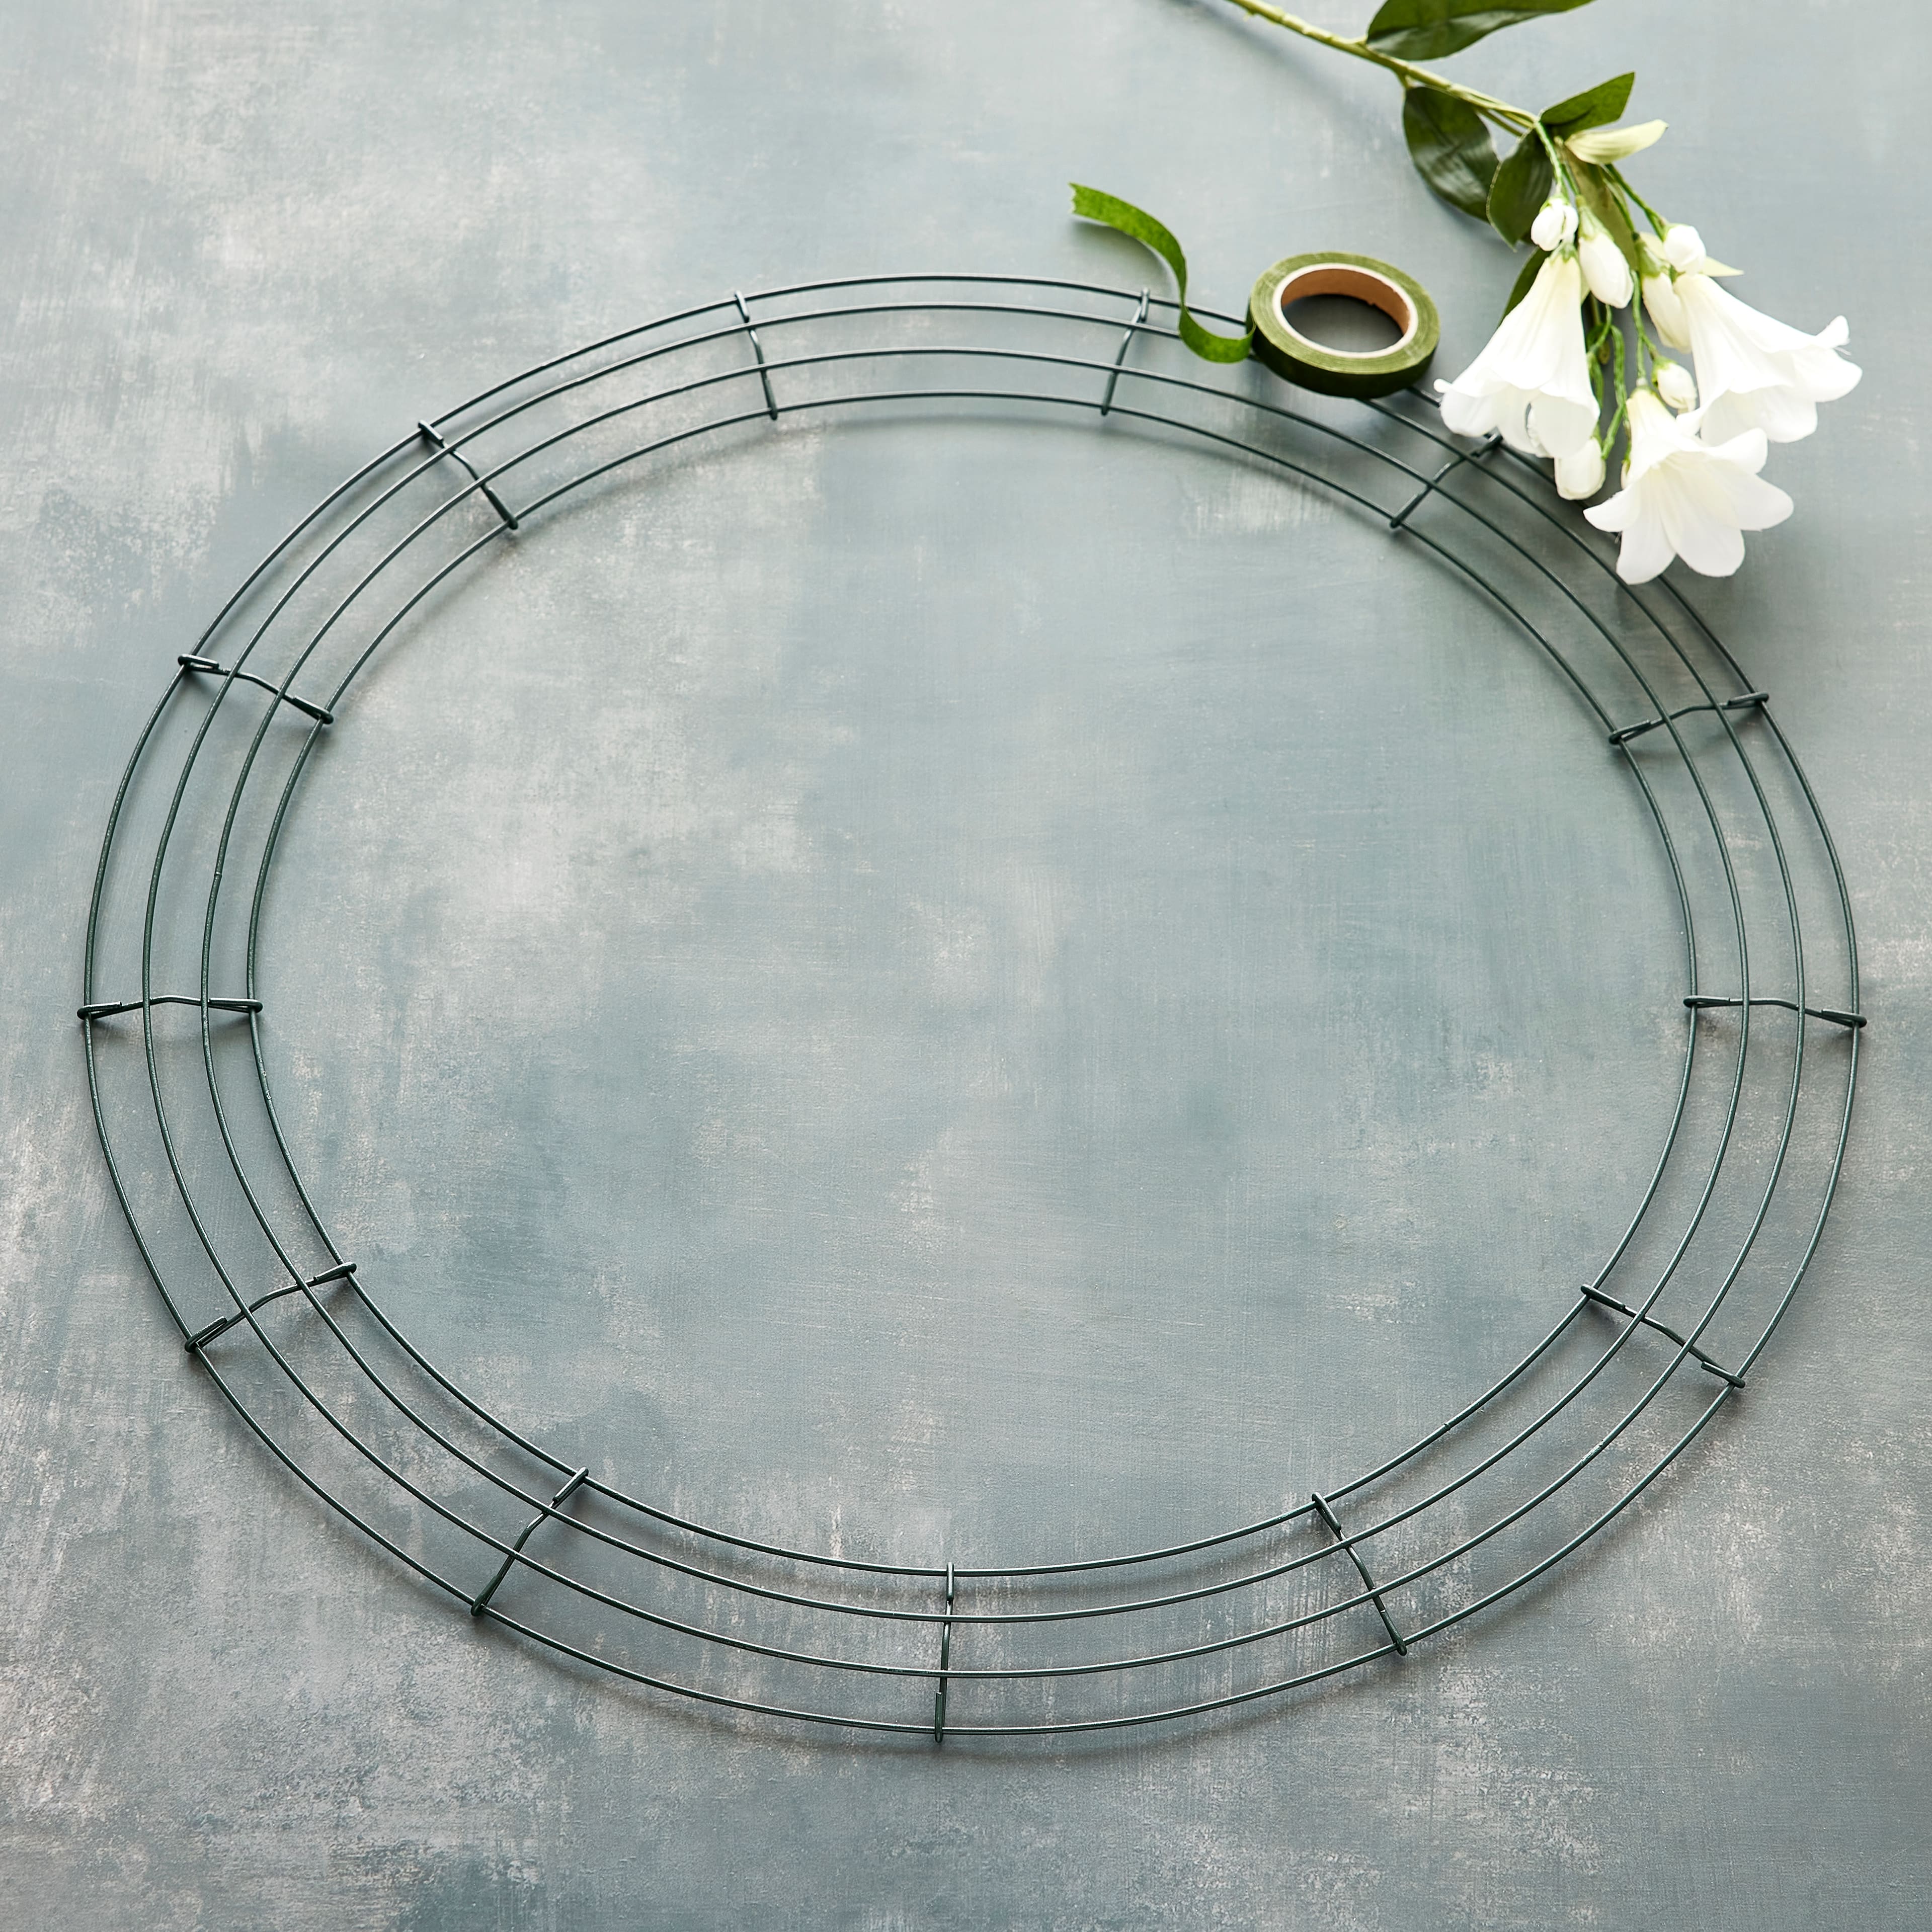 24 Wire Wreath Form